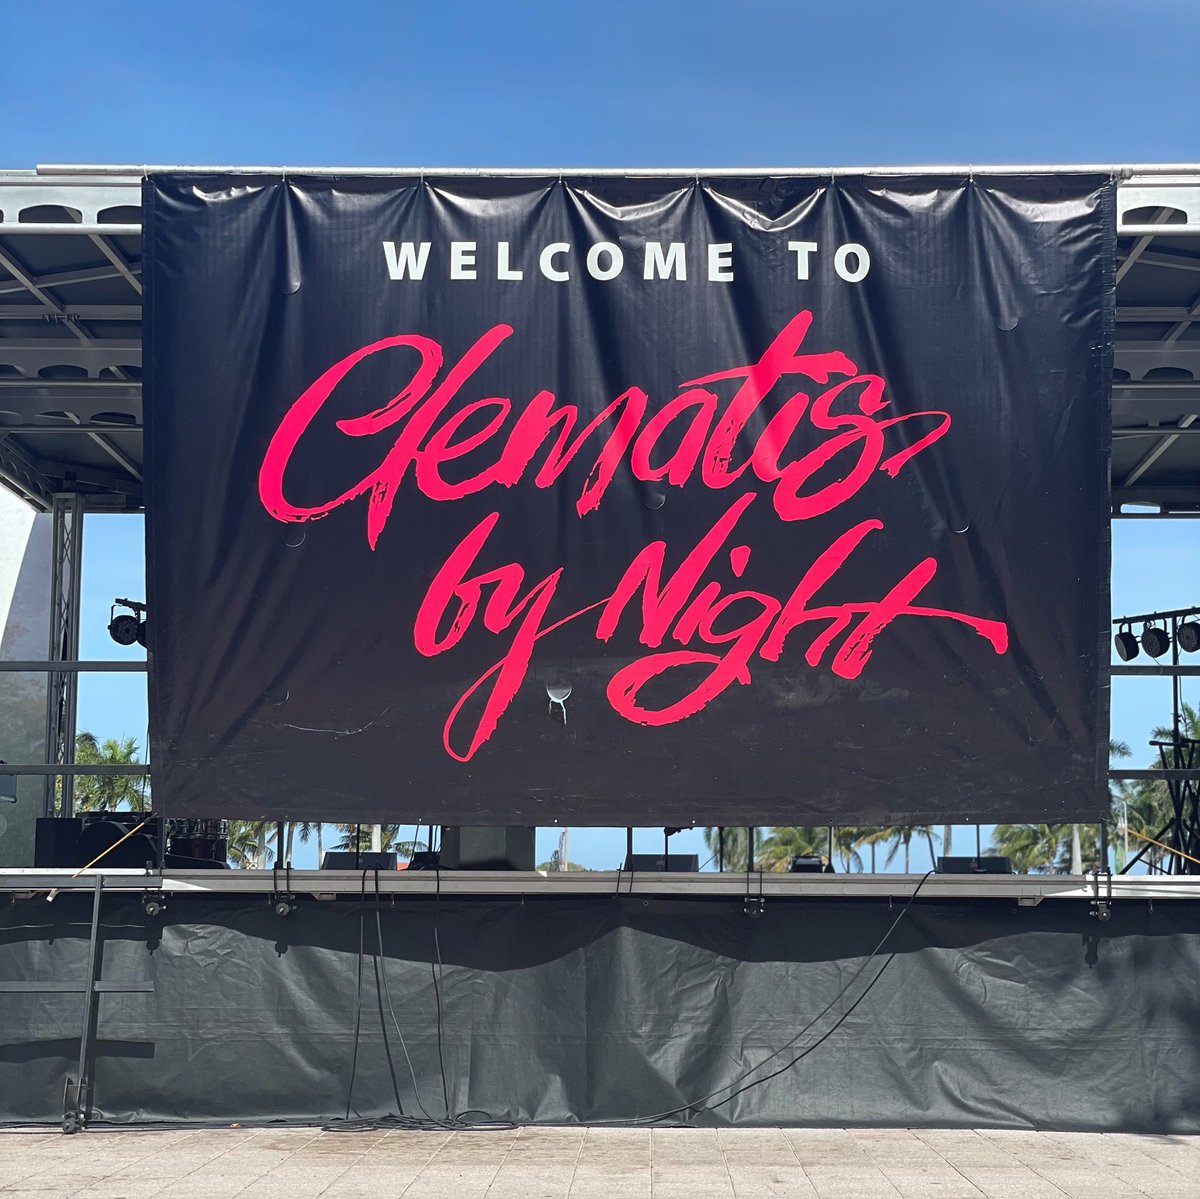 Head to the #DowntownWPB Waterfront TONIGHT from 6-9 p.m. for an electrifying night at Clematis By Night featuring the Dee Dee Wilde Band! 🎶 From soulful ballads to high-energy dance tunes, get ready for a night of pure entertainment! Learn more: DowntownWPB.com